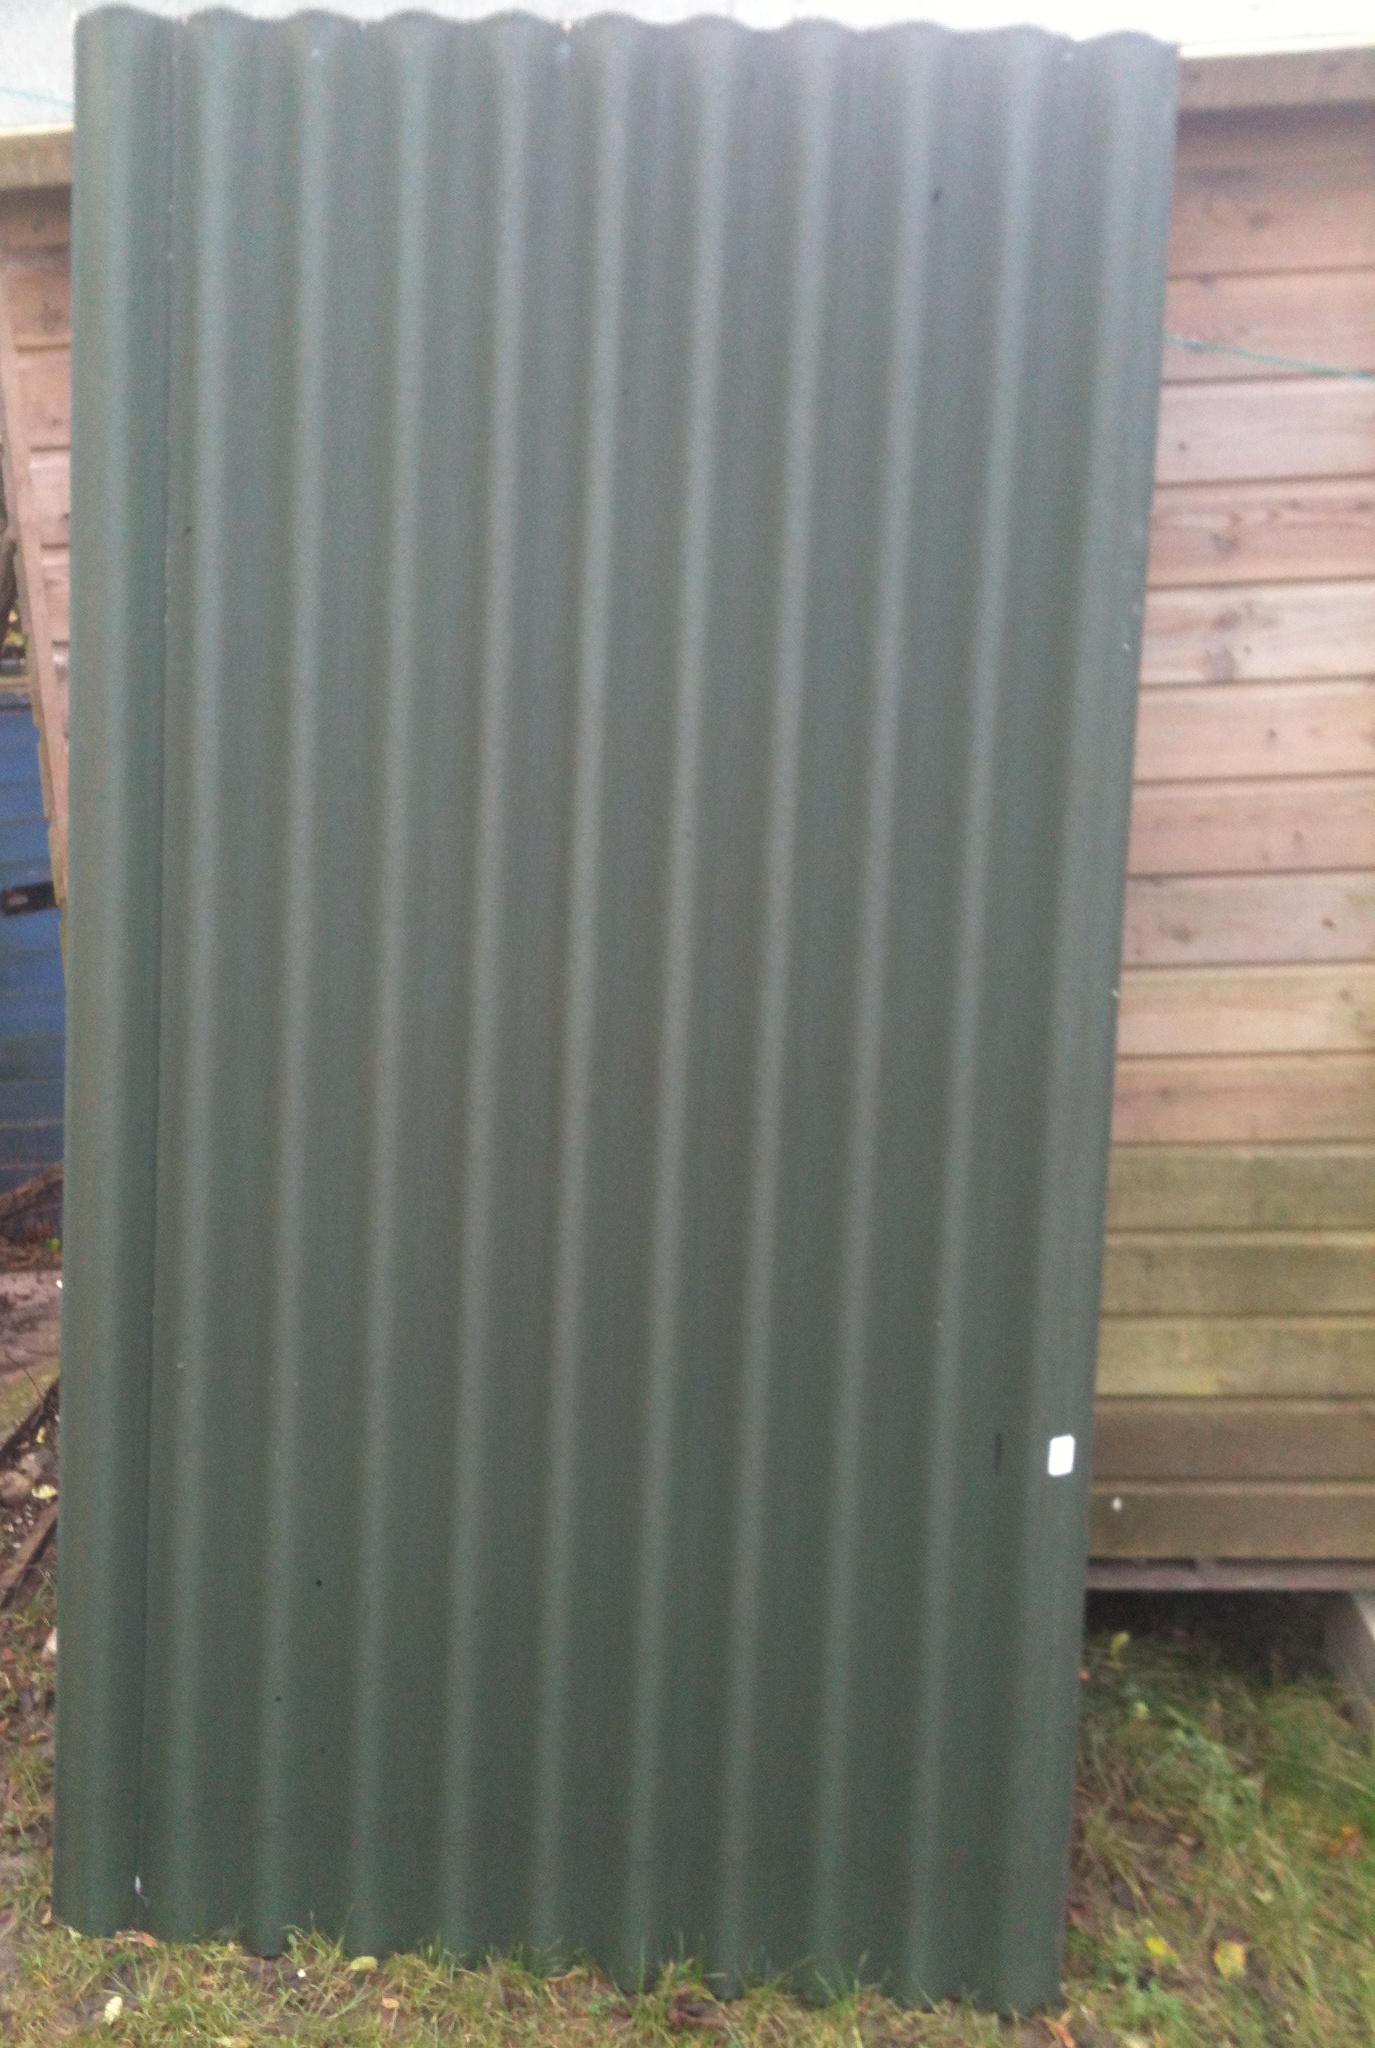 Wickes corrugated roofing sheets as shown on the Wickes website.